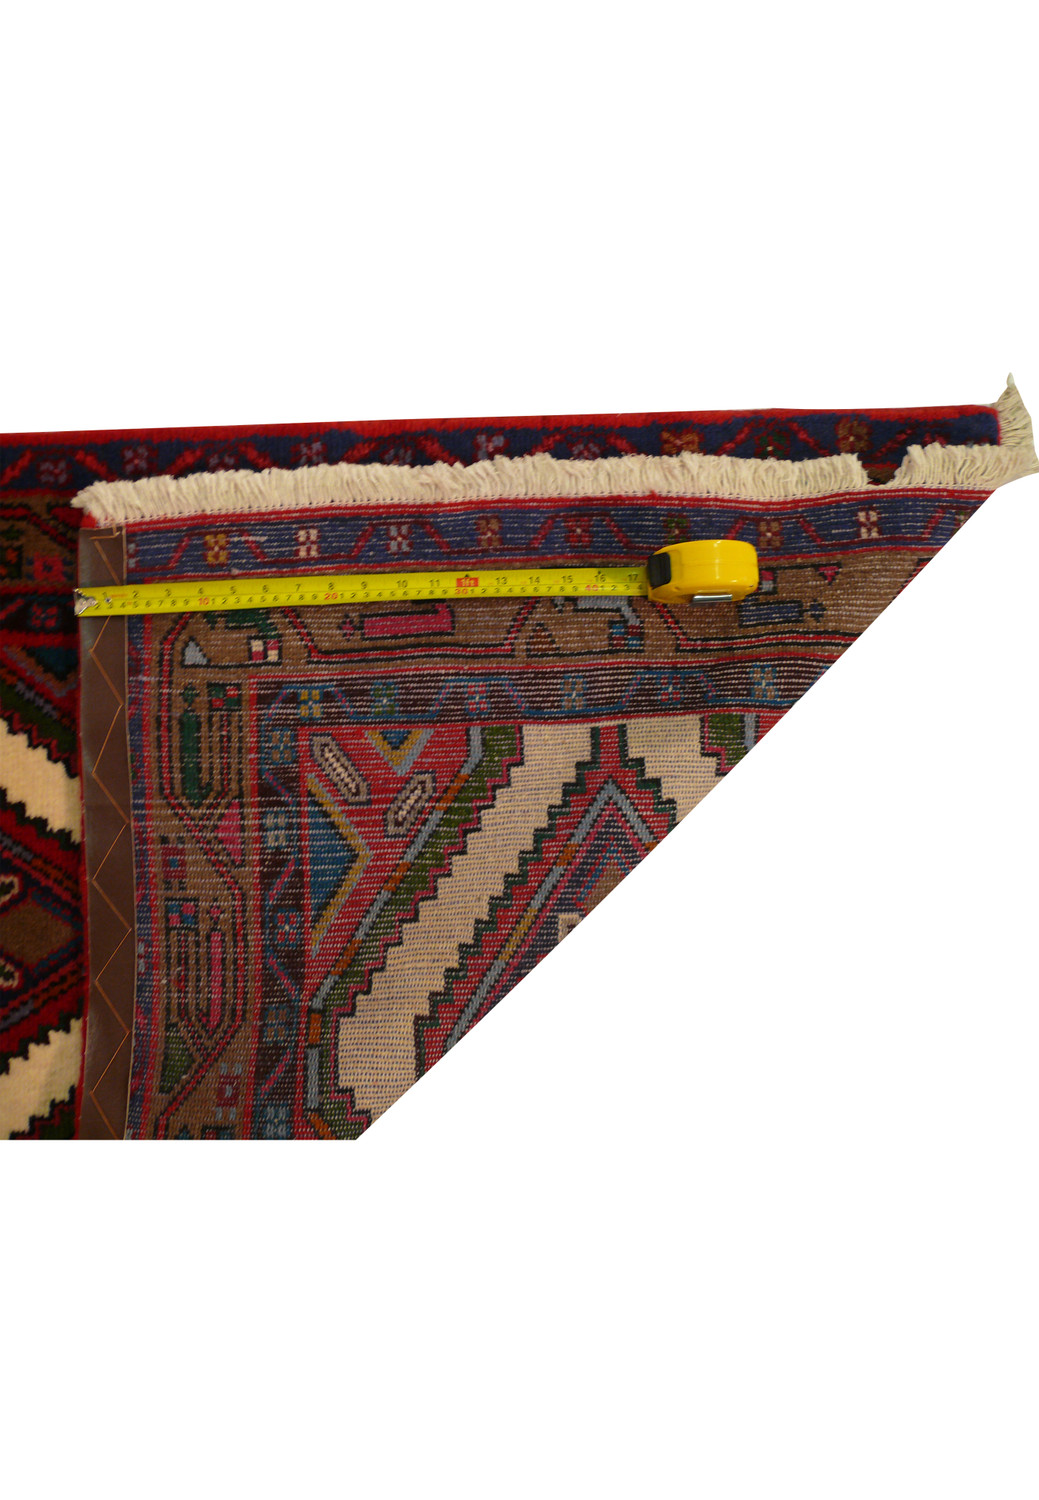 End view of Persian Hamedan Runner Rug, emphasizing the hand-knotted fringes and solid craftsmanship